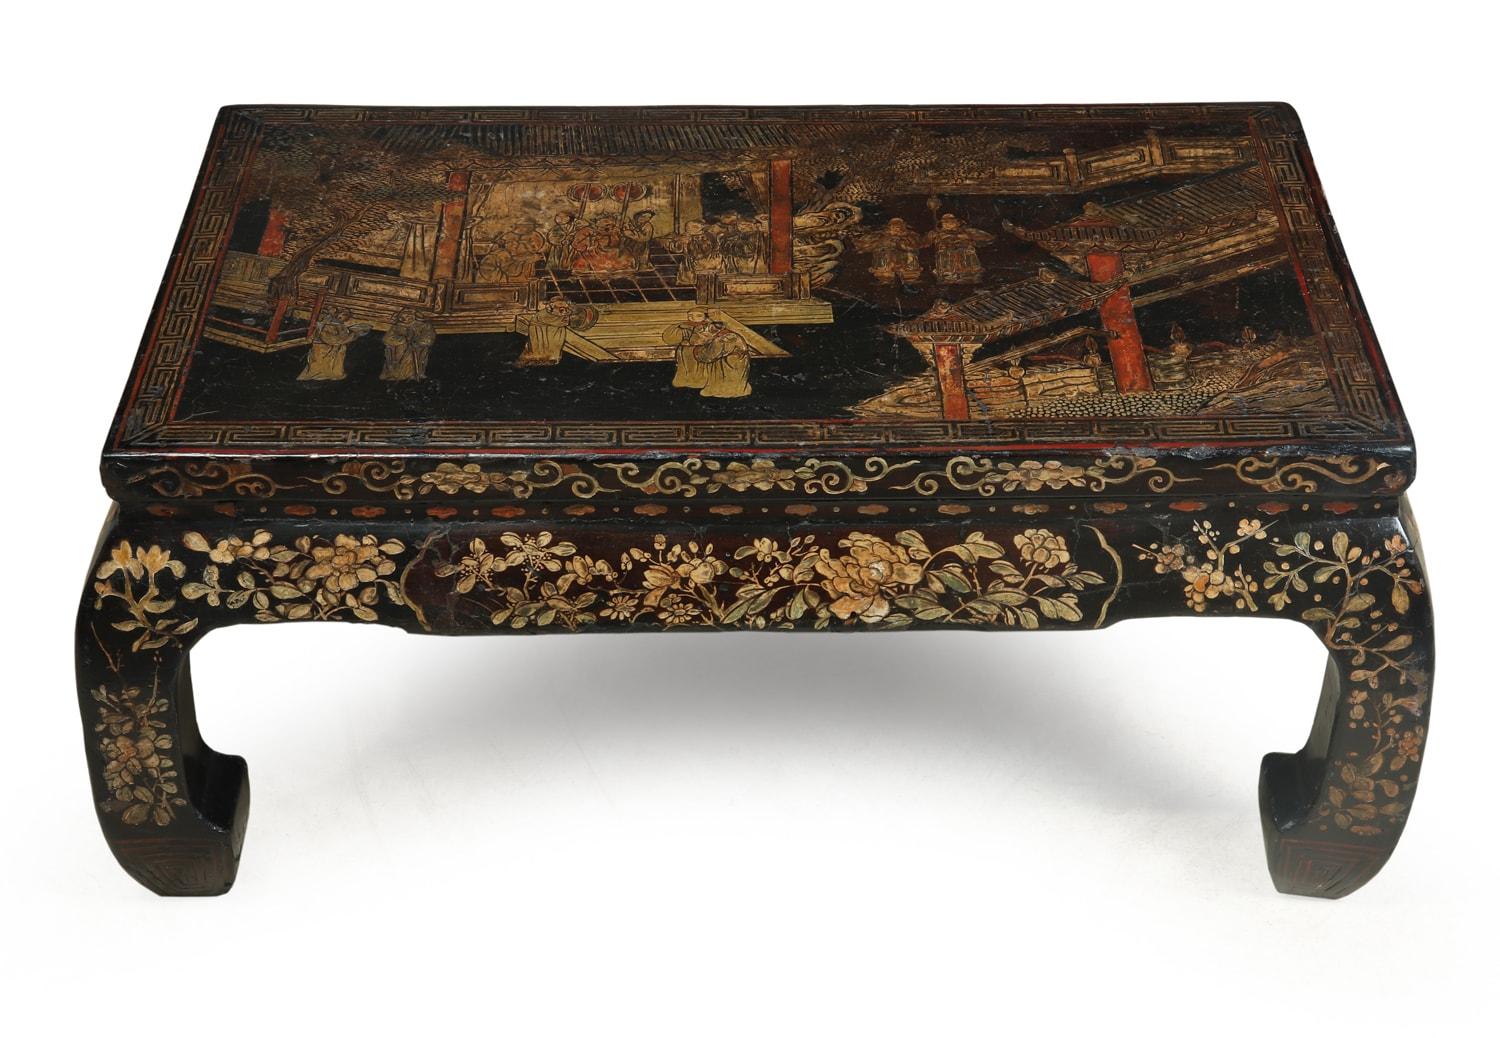 Chinoiserie Kang table, late 17th century
A very early chinoiserie Kang table with scenes on the top from the Tang period from the 6th century, around the freeze and legs there are cherry blossom and floral design, the table has had restoration